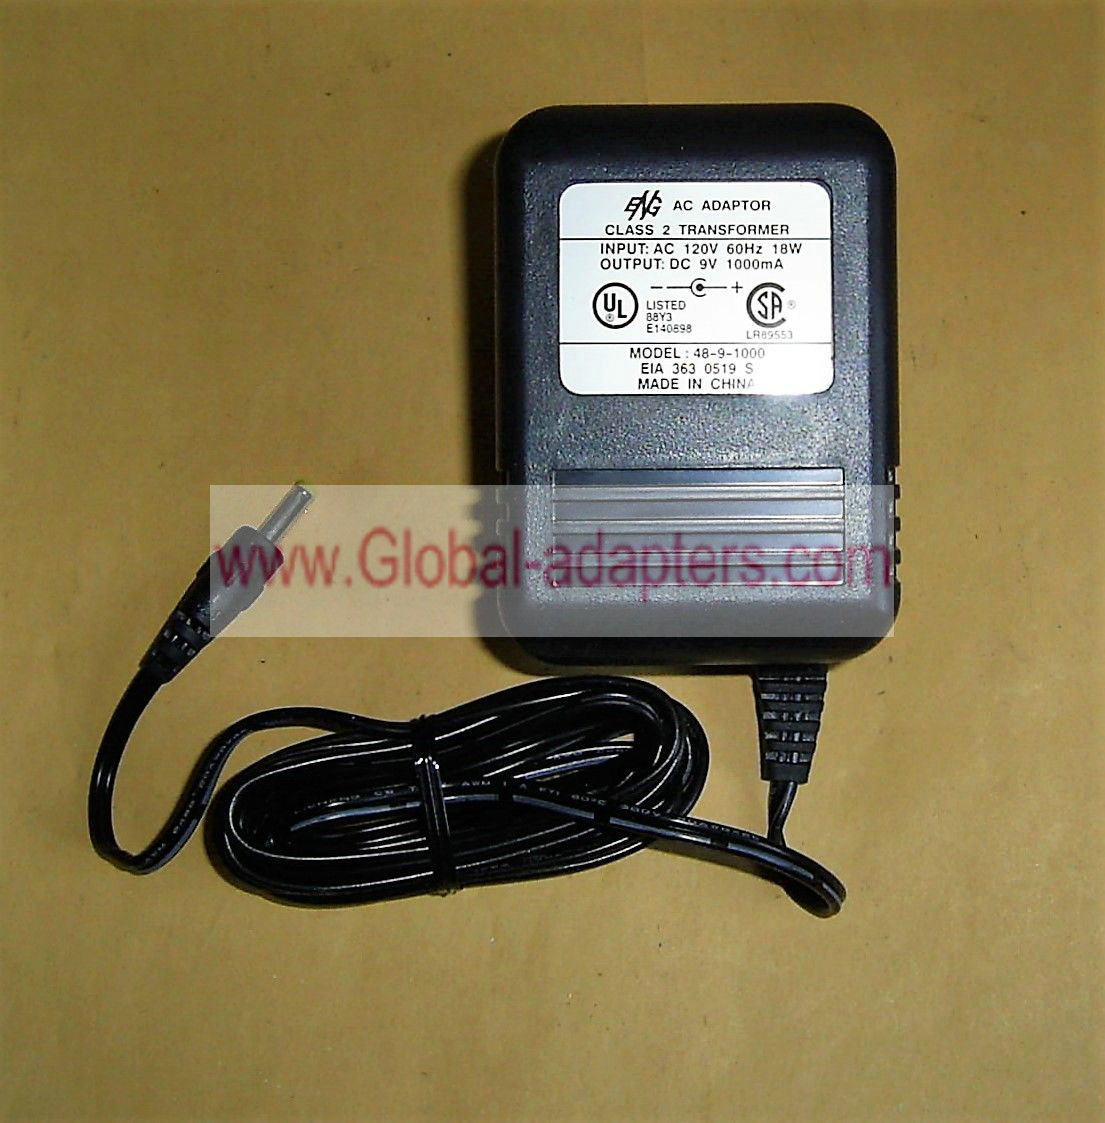 NEW ENG 9VDC 1A 48-9-1000 Class 2 transformer Wall Adapter Charger - Click Image to Close